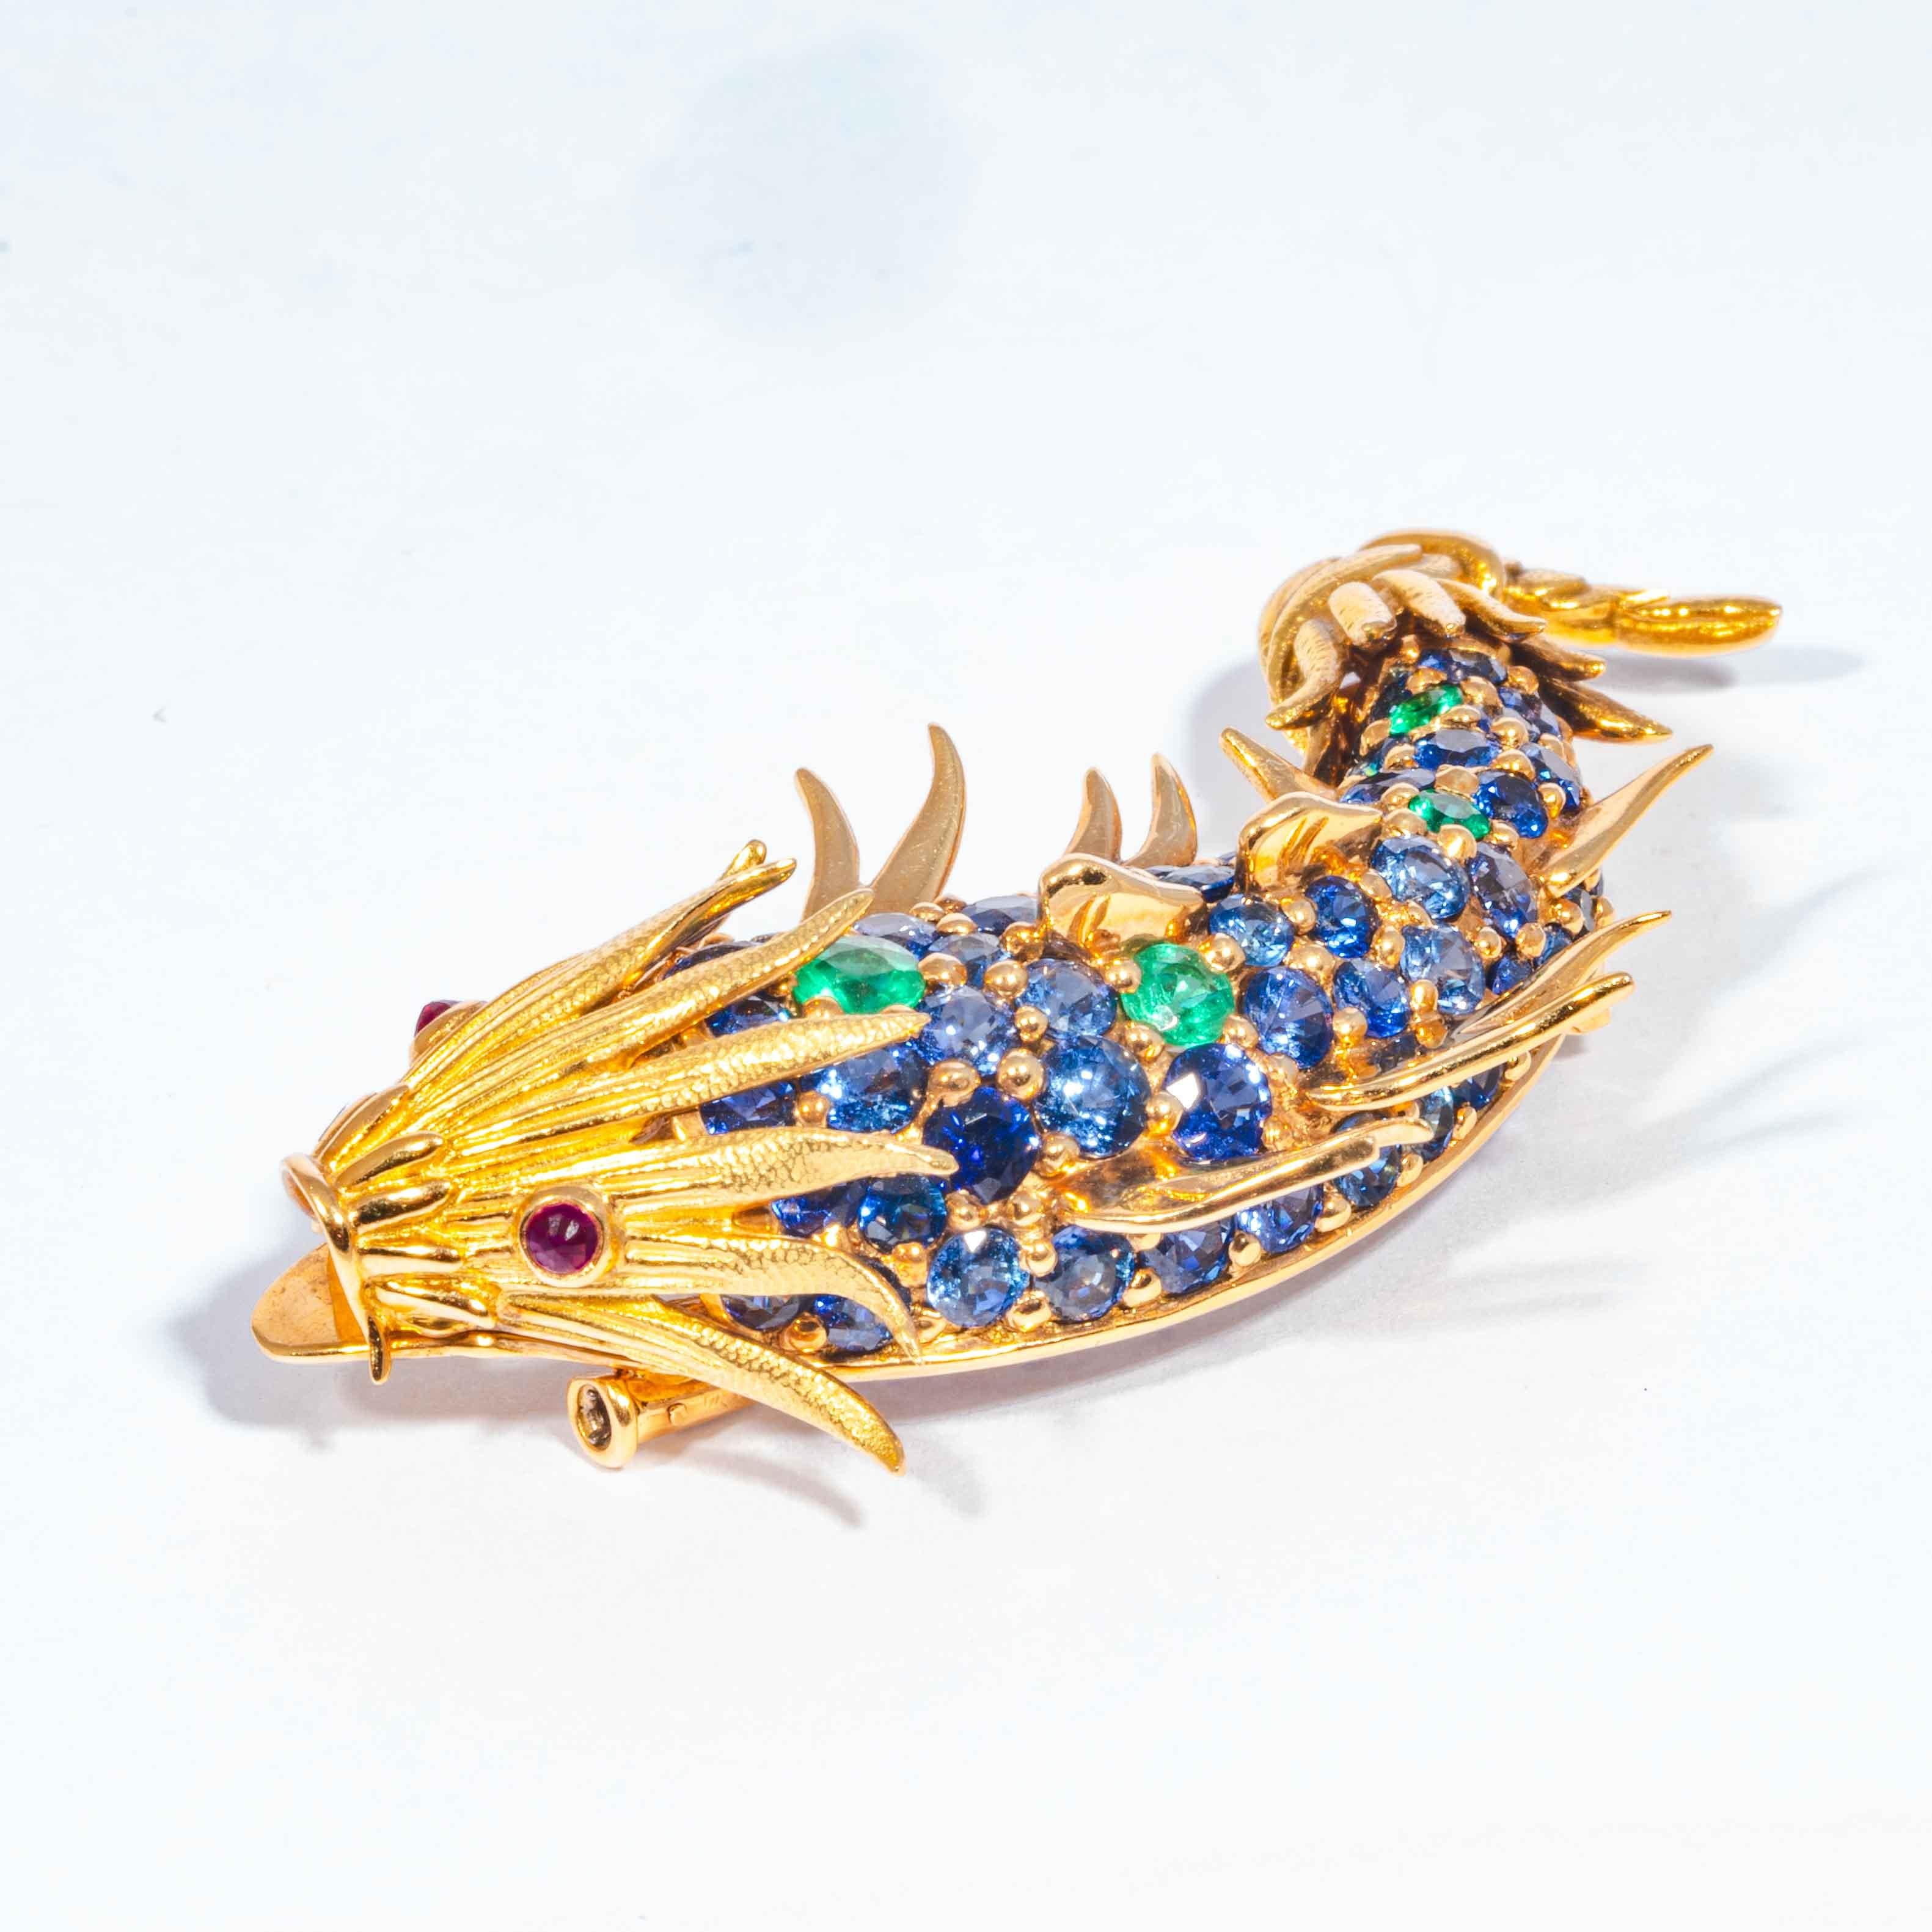 This late 20th century pin is comprised of full cut blue Ceylon sapphires, a 5 accenting green emerald fish 